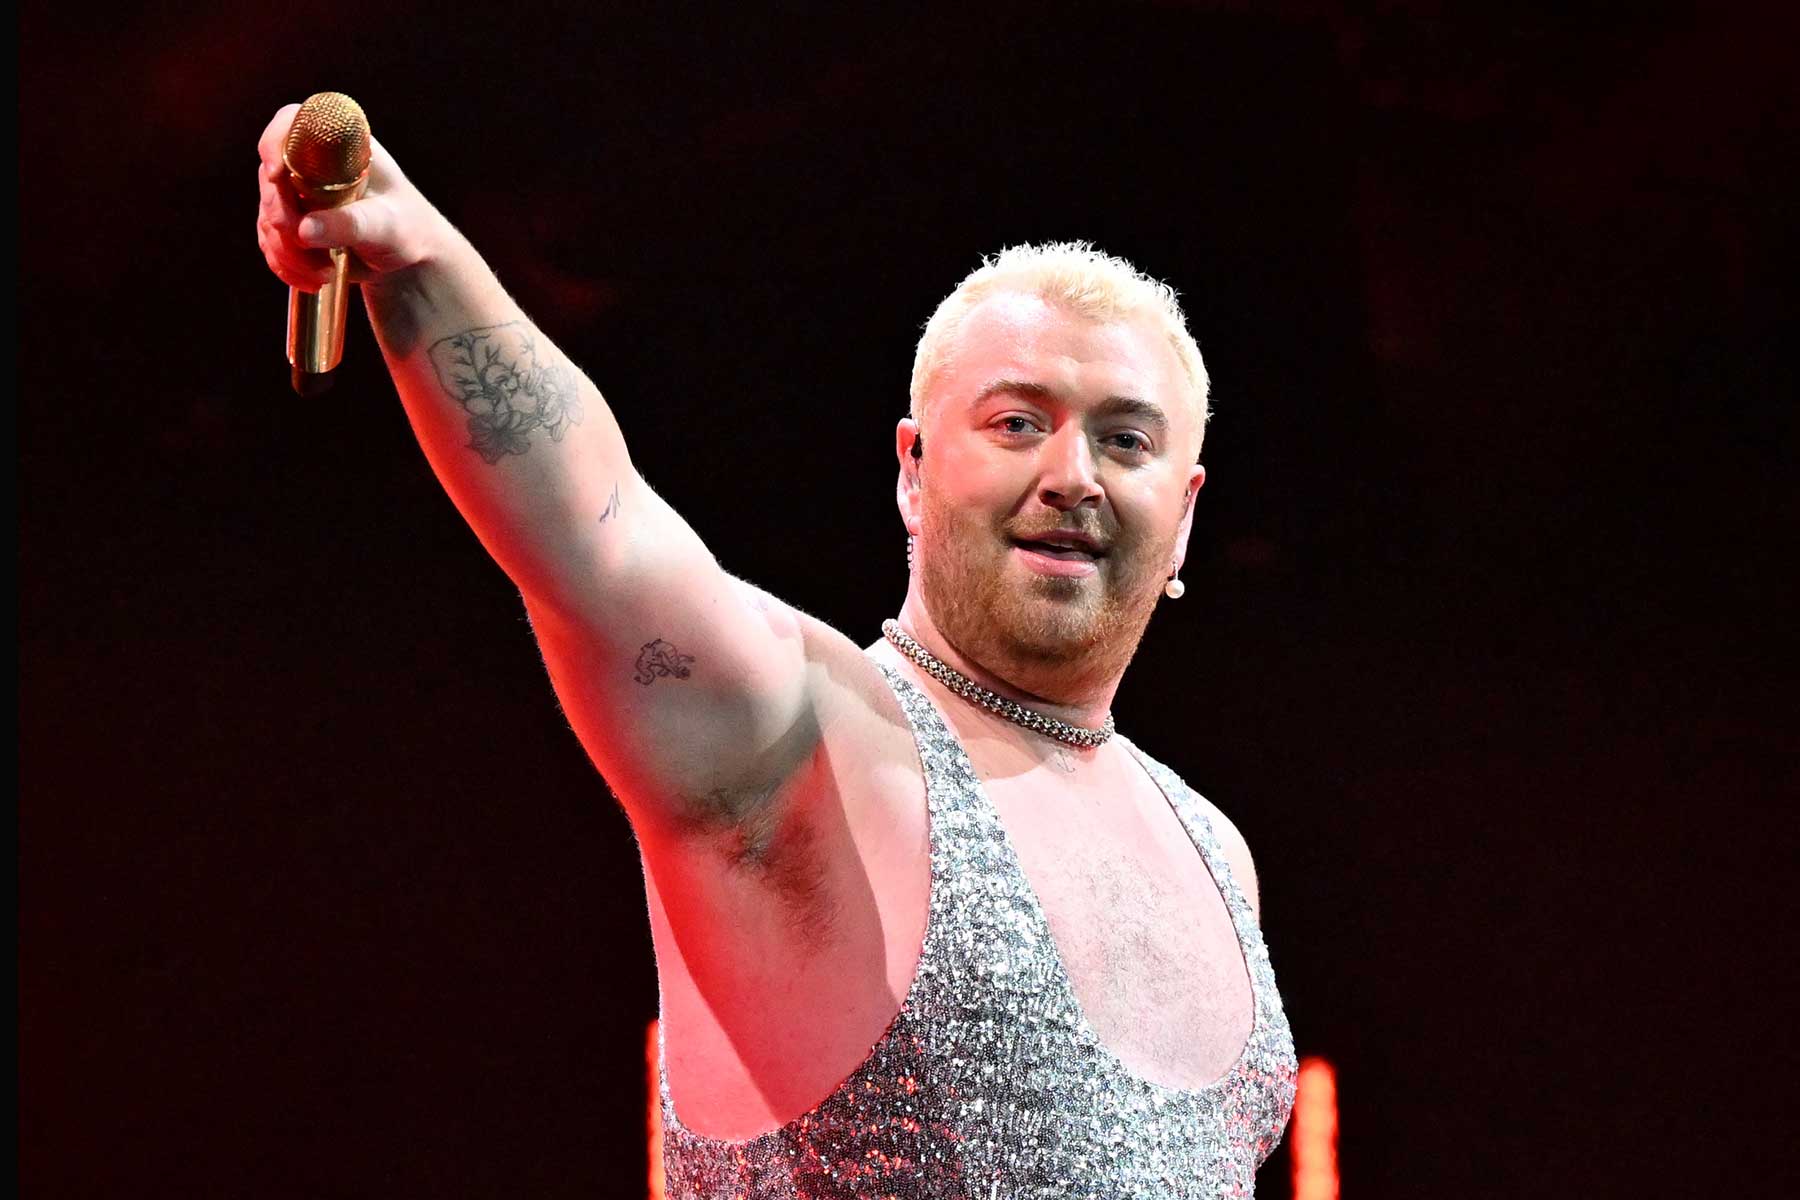 Internet divided over Sam Smith wearing corset in new magazine